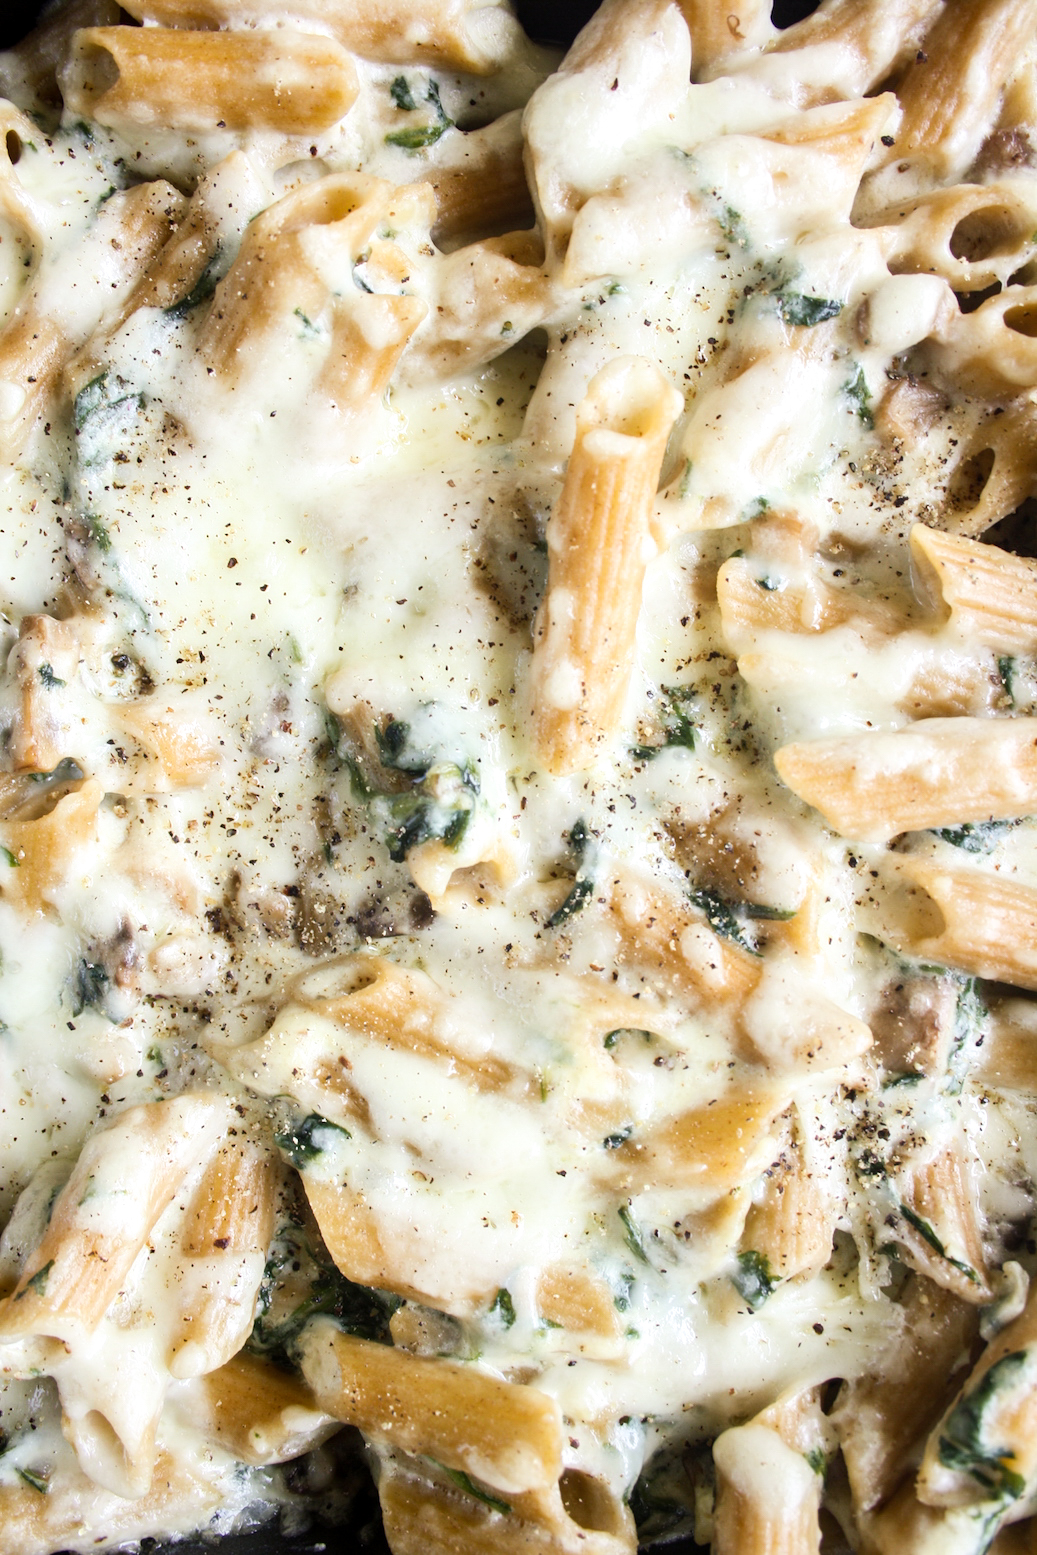 Penne pasta in homemade bechamel sauce with sautéed mushrooms and spinach